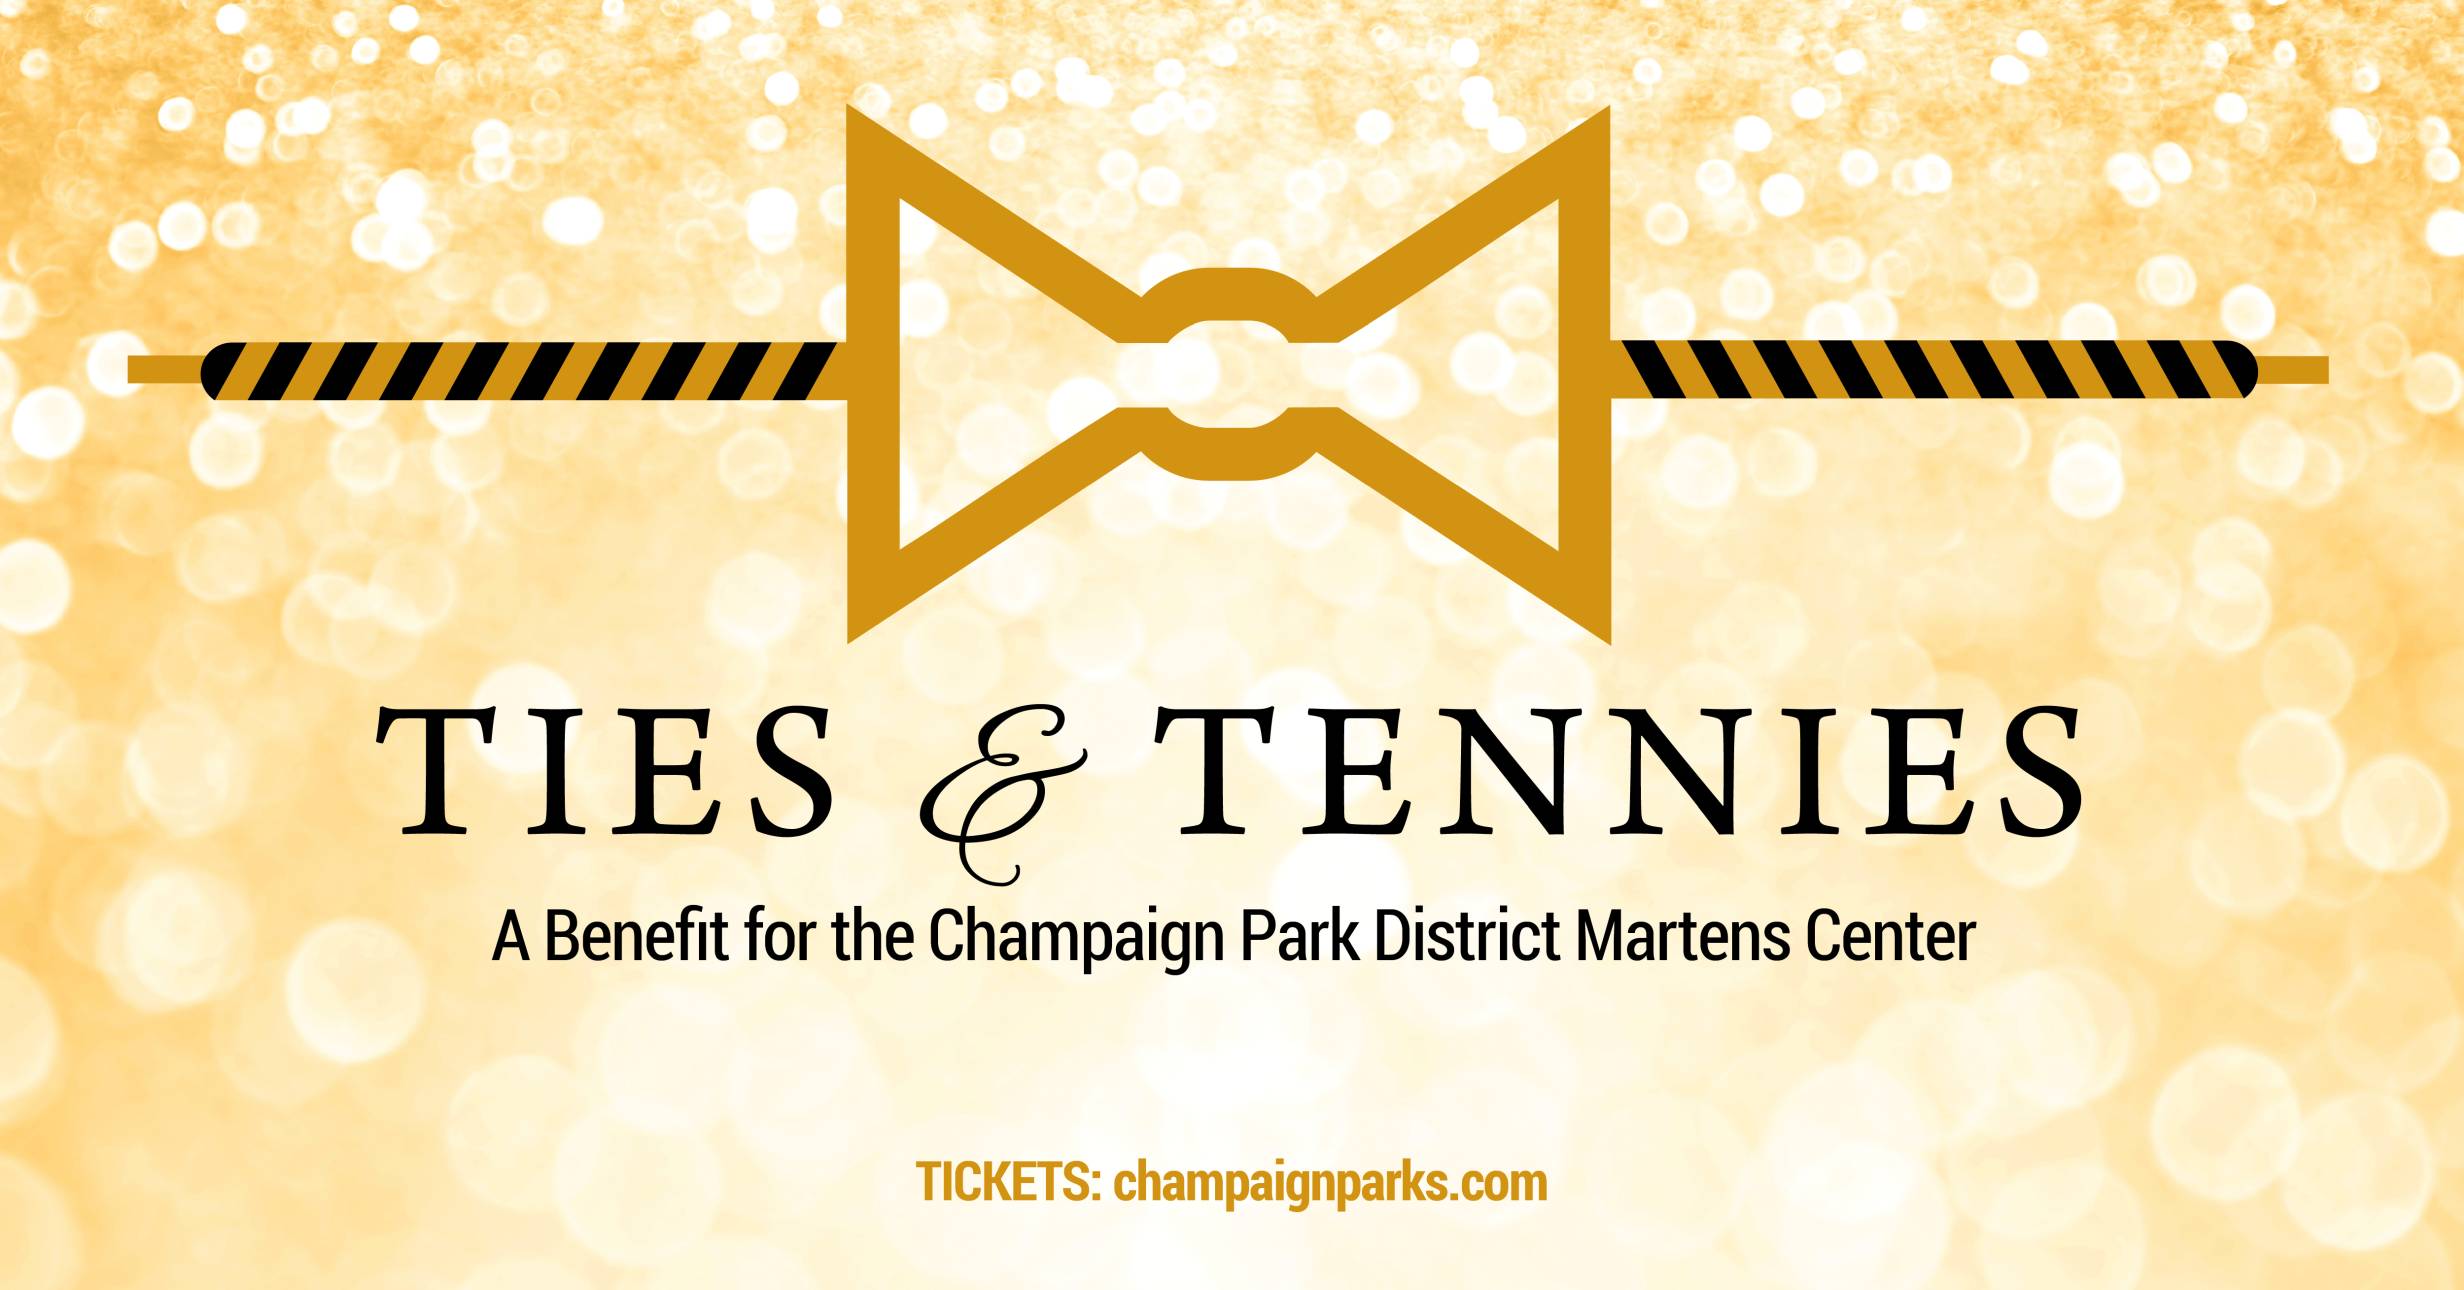 Champaign Park District is hosting a fundraiser for the Martens Center